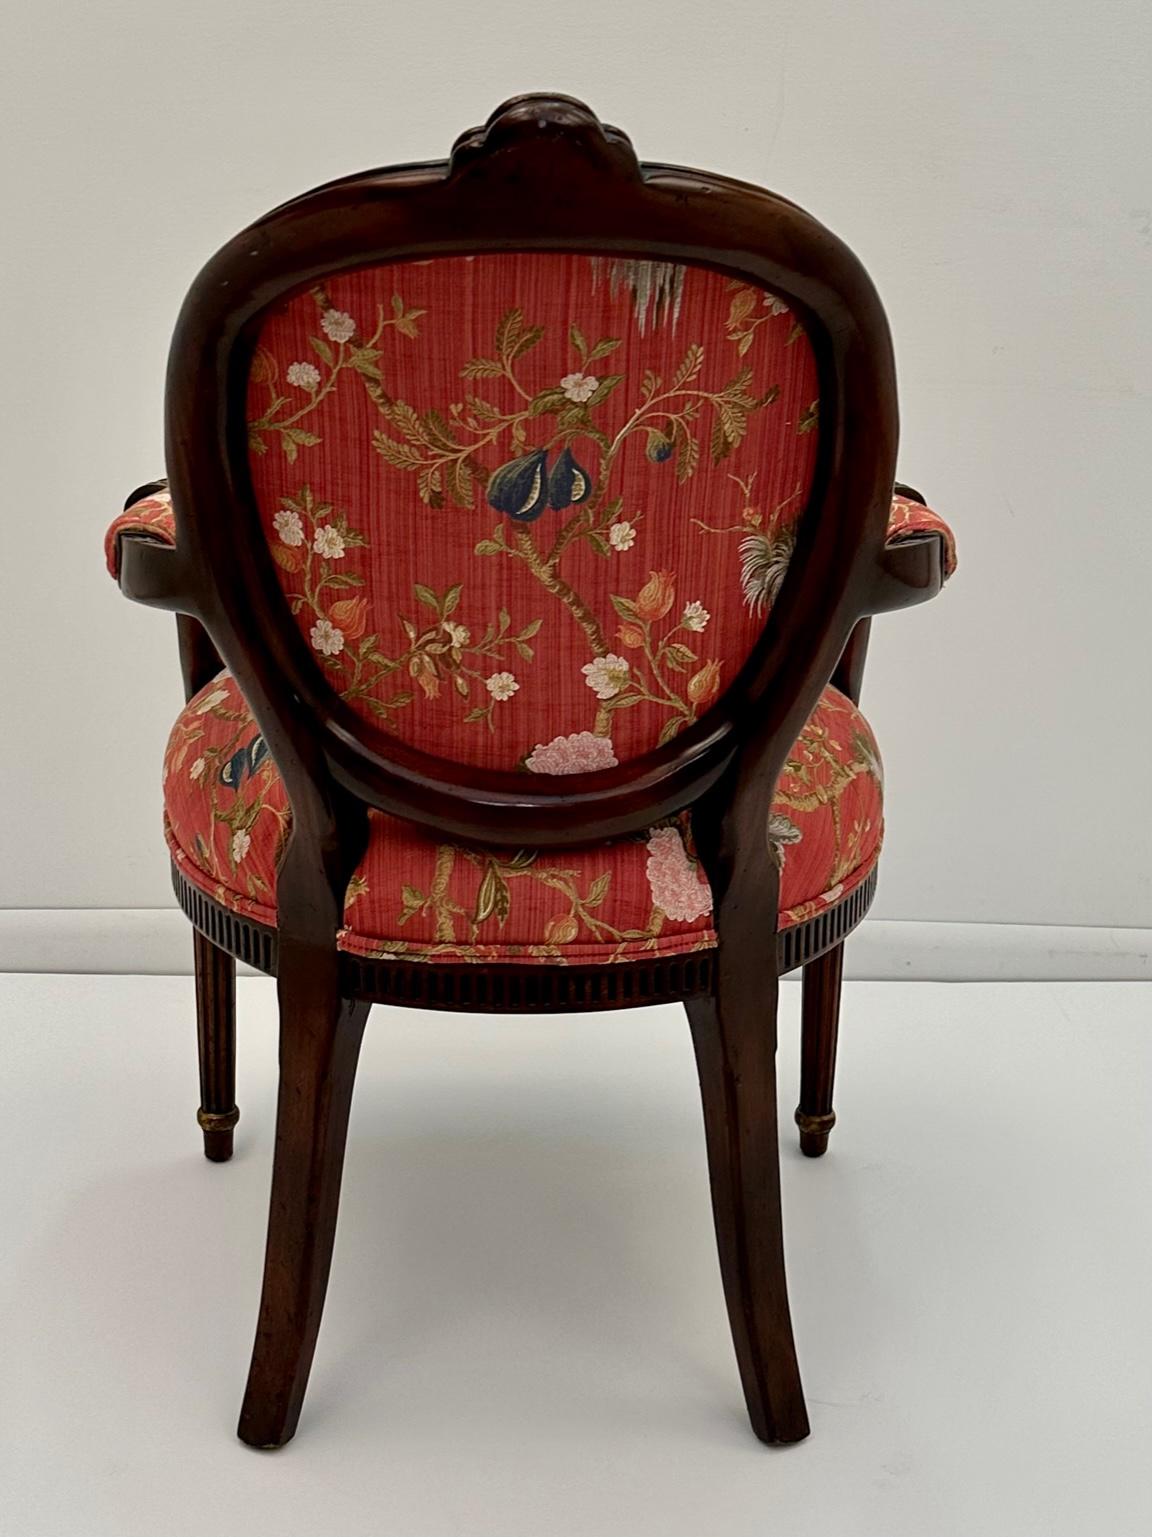 Upholstery Sumptuous Scalamandre Upholstered English Hand Carved Mahogany Armchairs For Sale